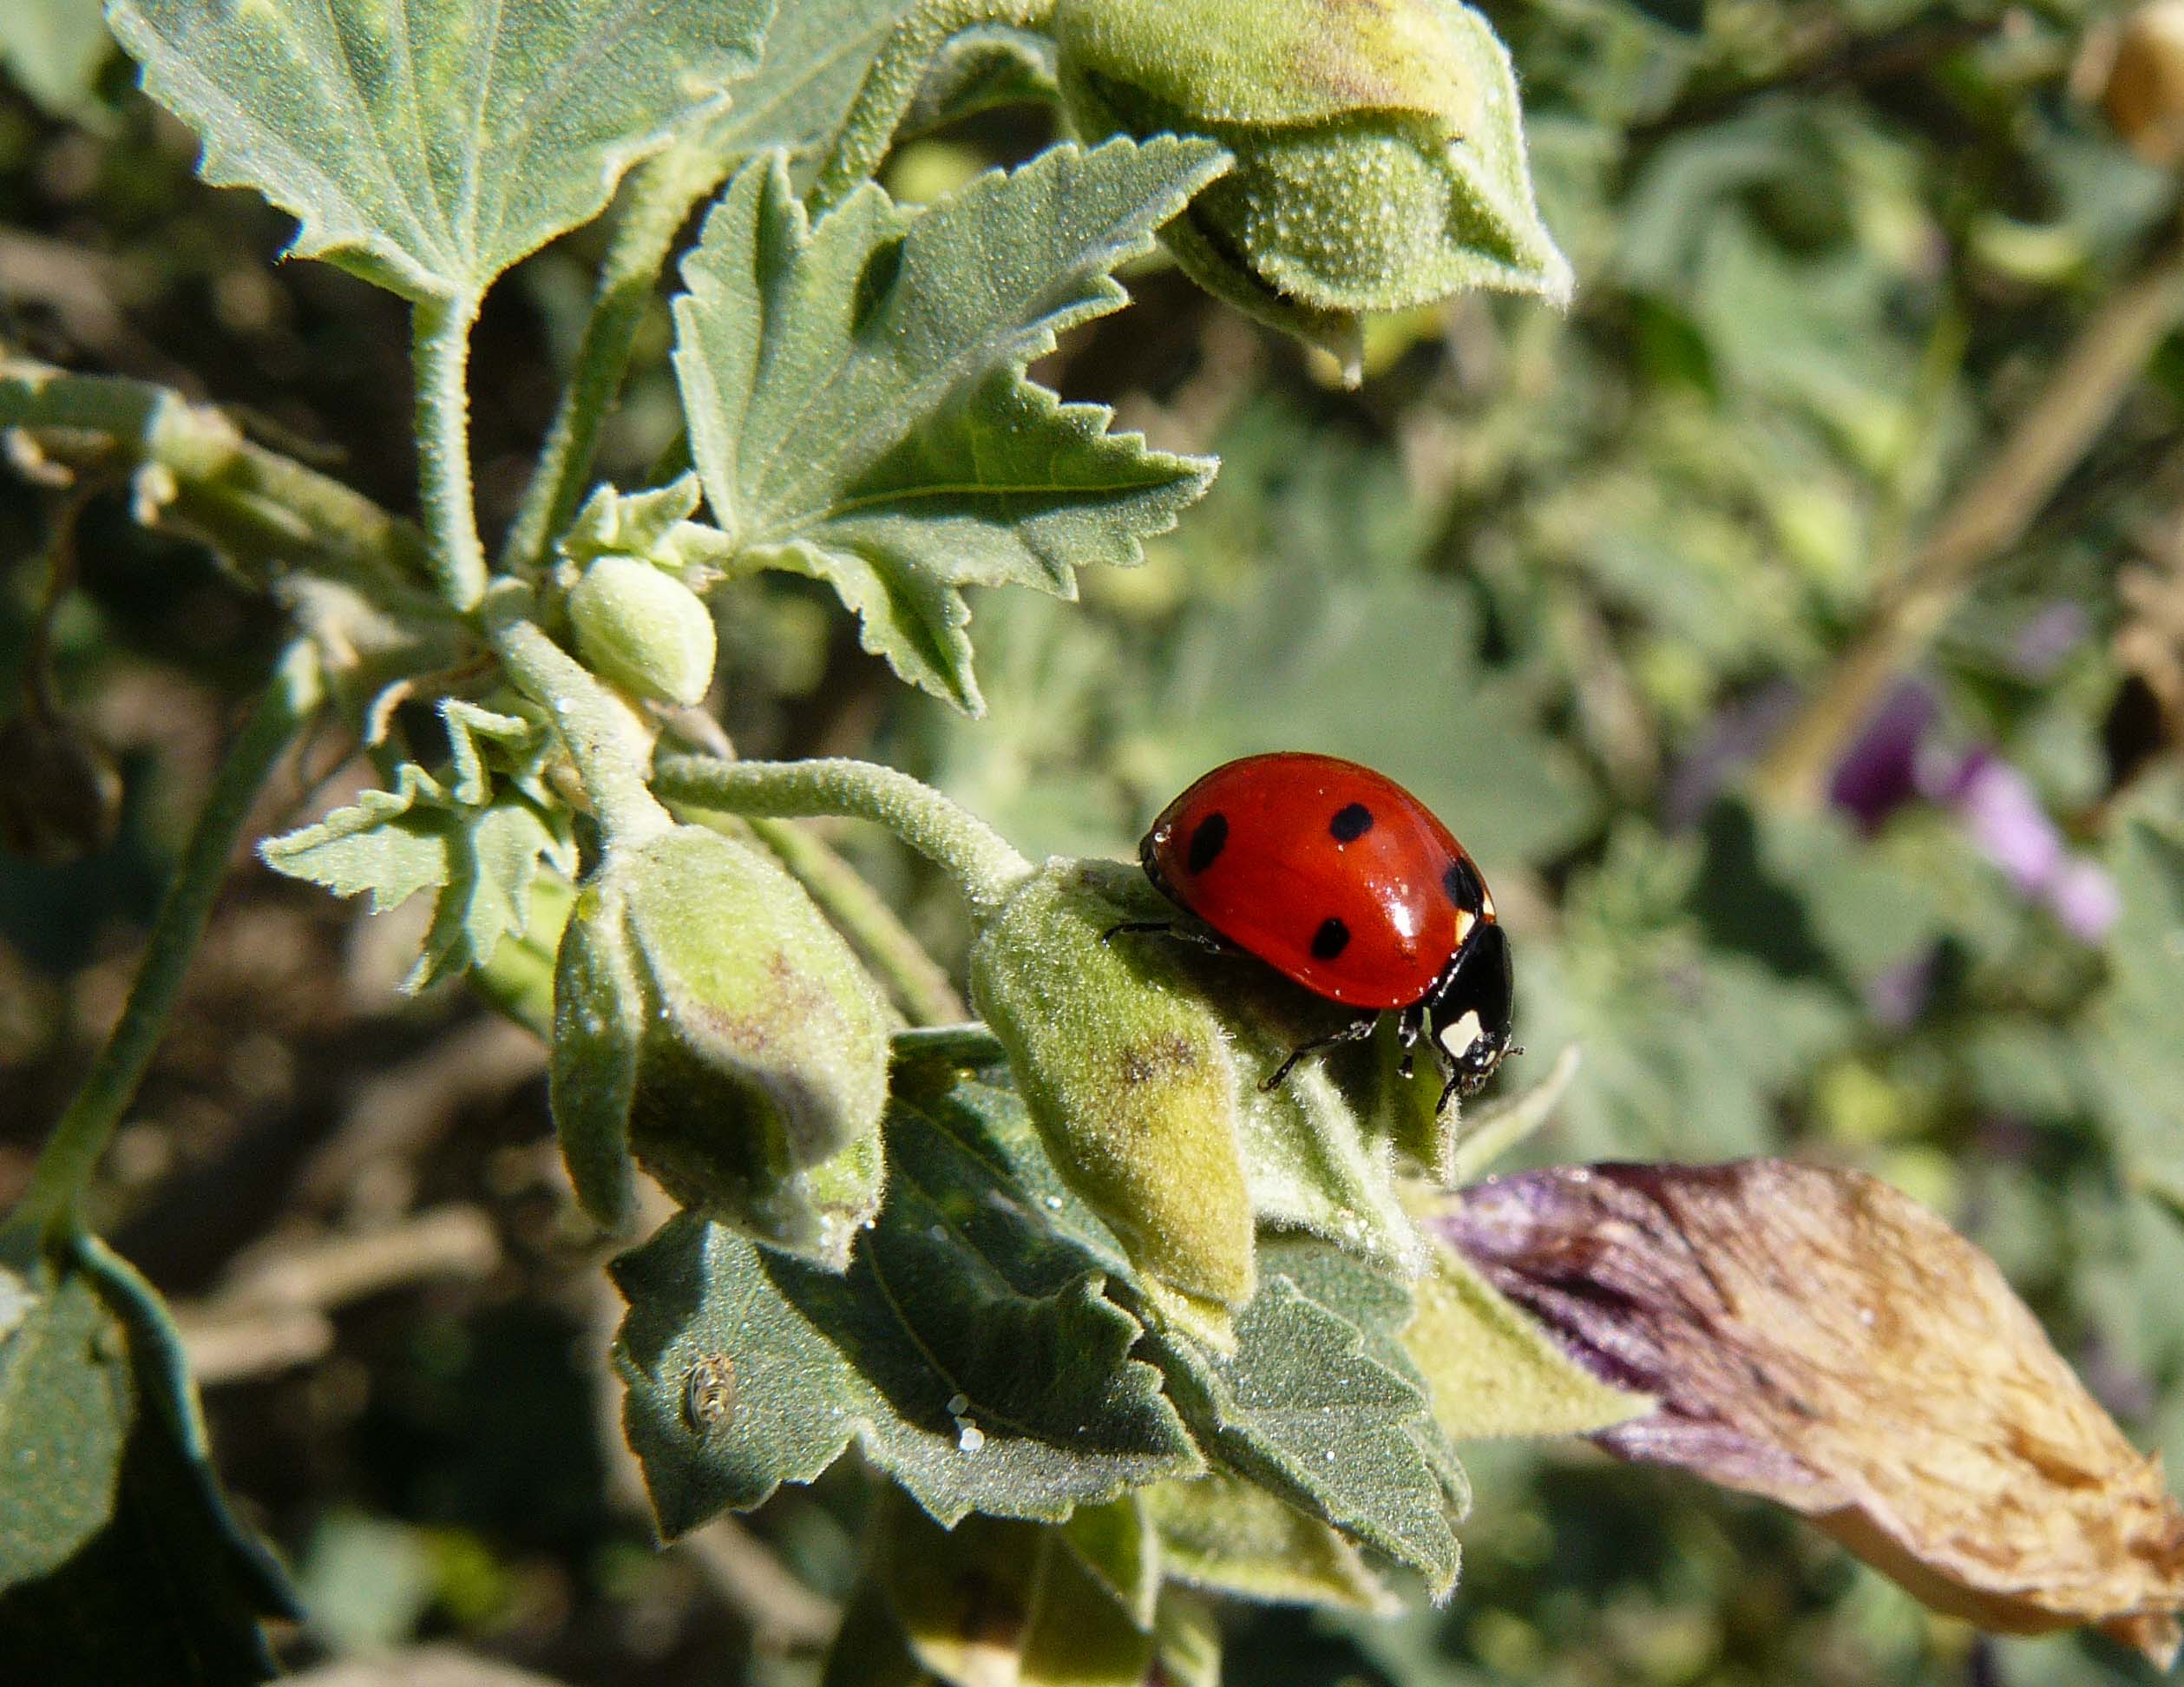 A little red ladybug